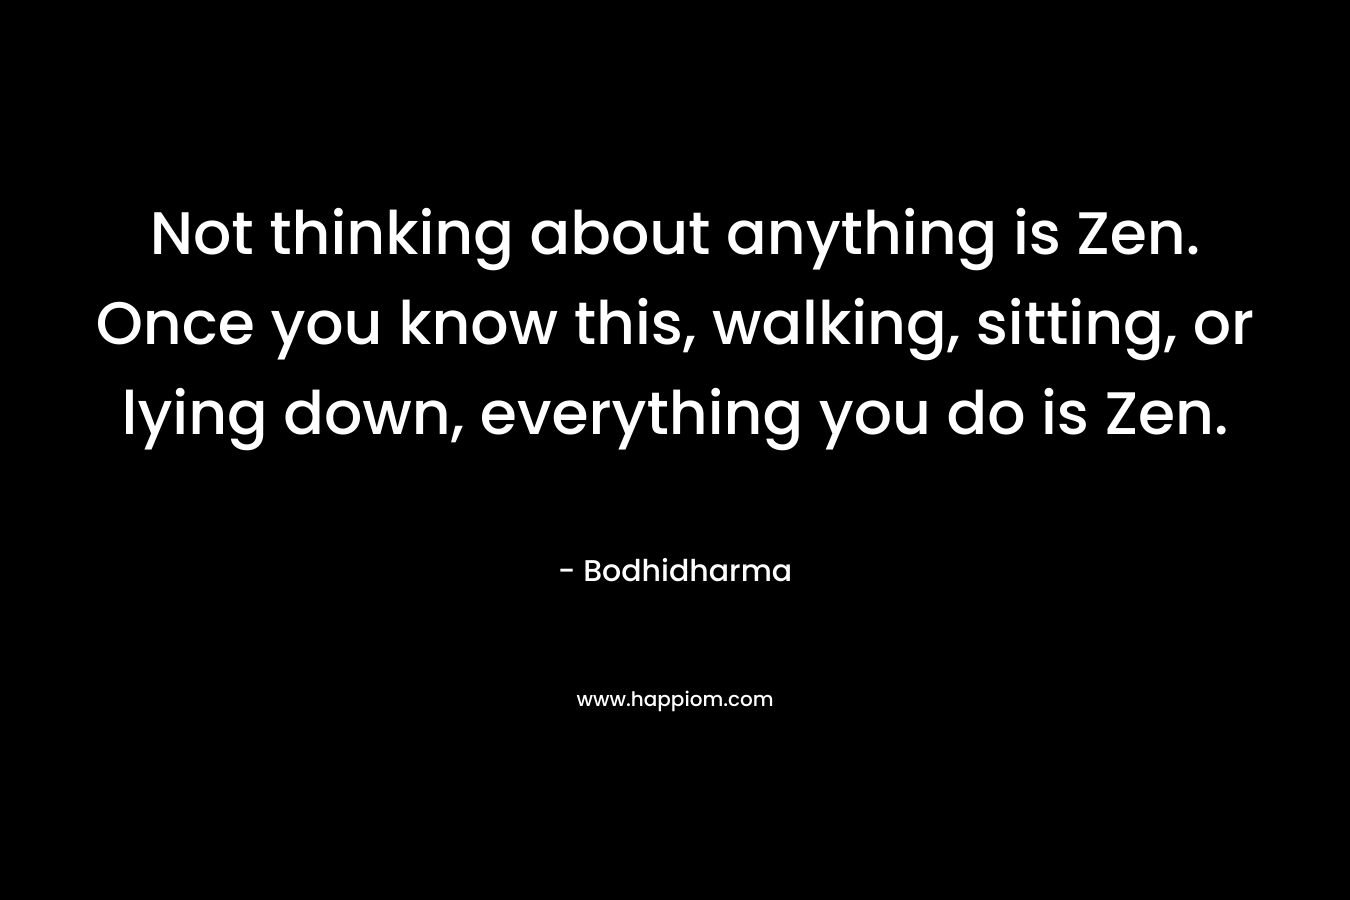 Not thinking about anything is Zen. Once you know this, walking, sitting, or lying down, everything you do is Zen. – Bodhidharma